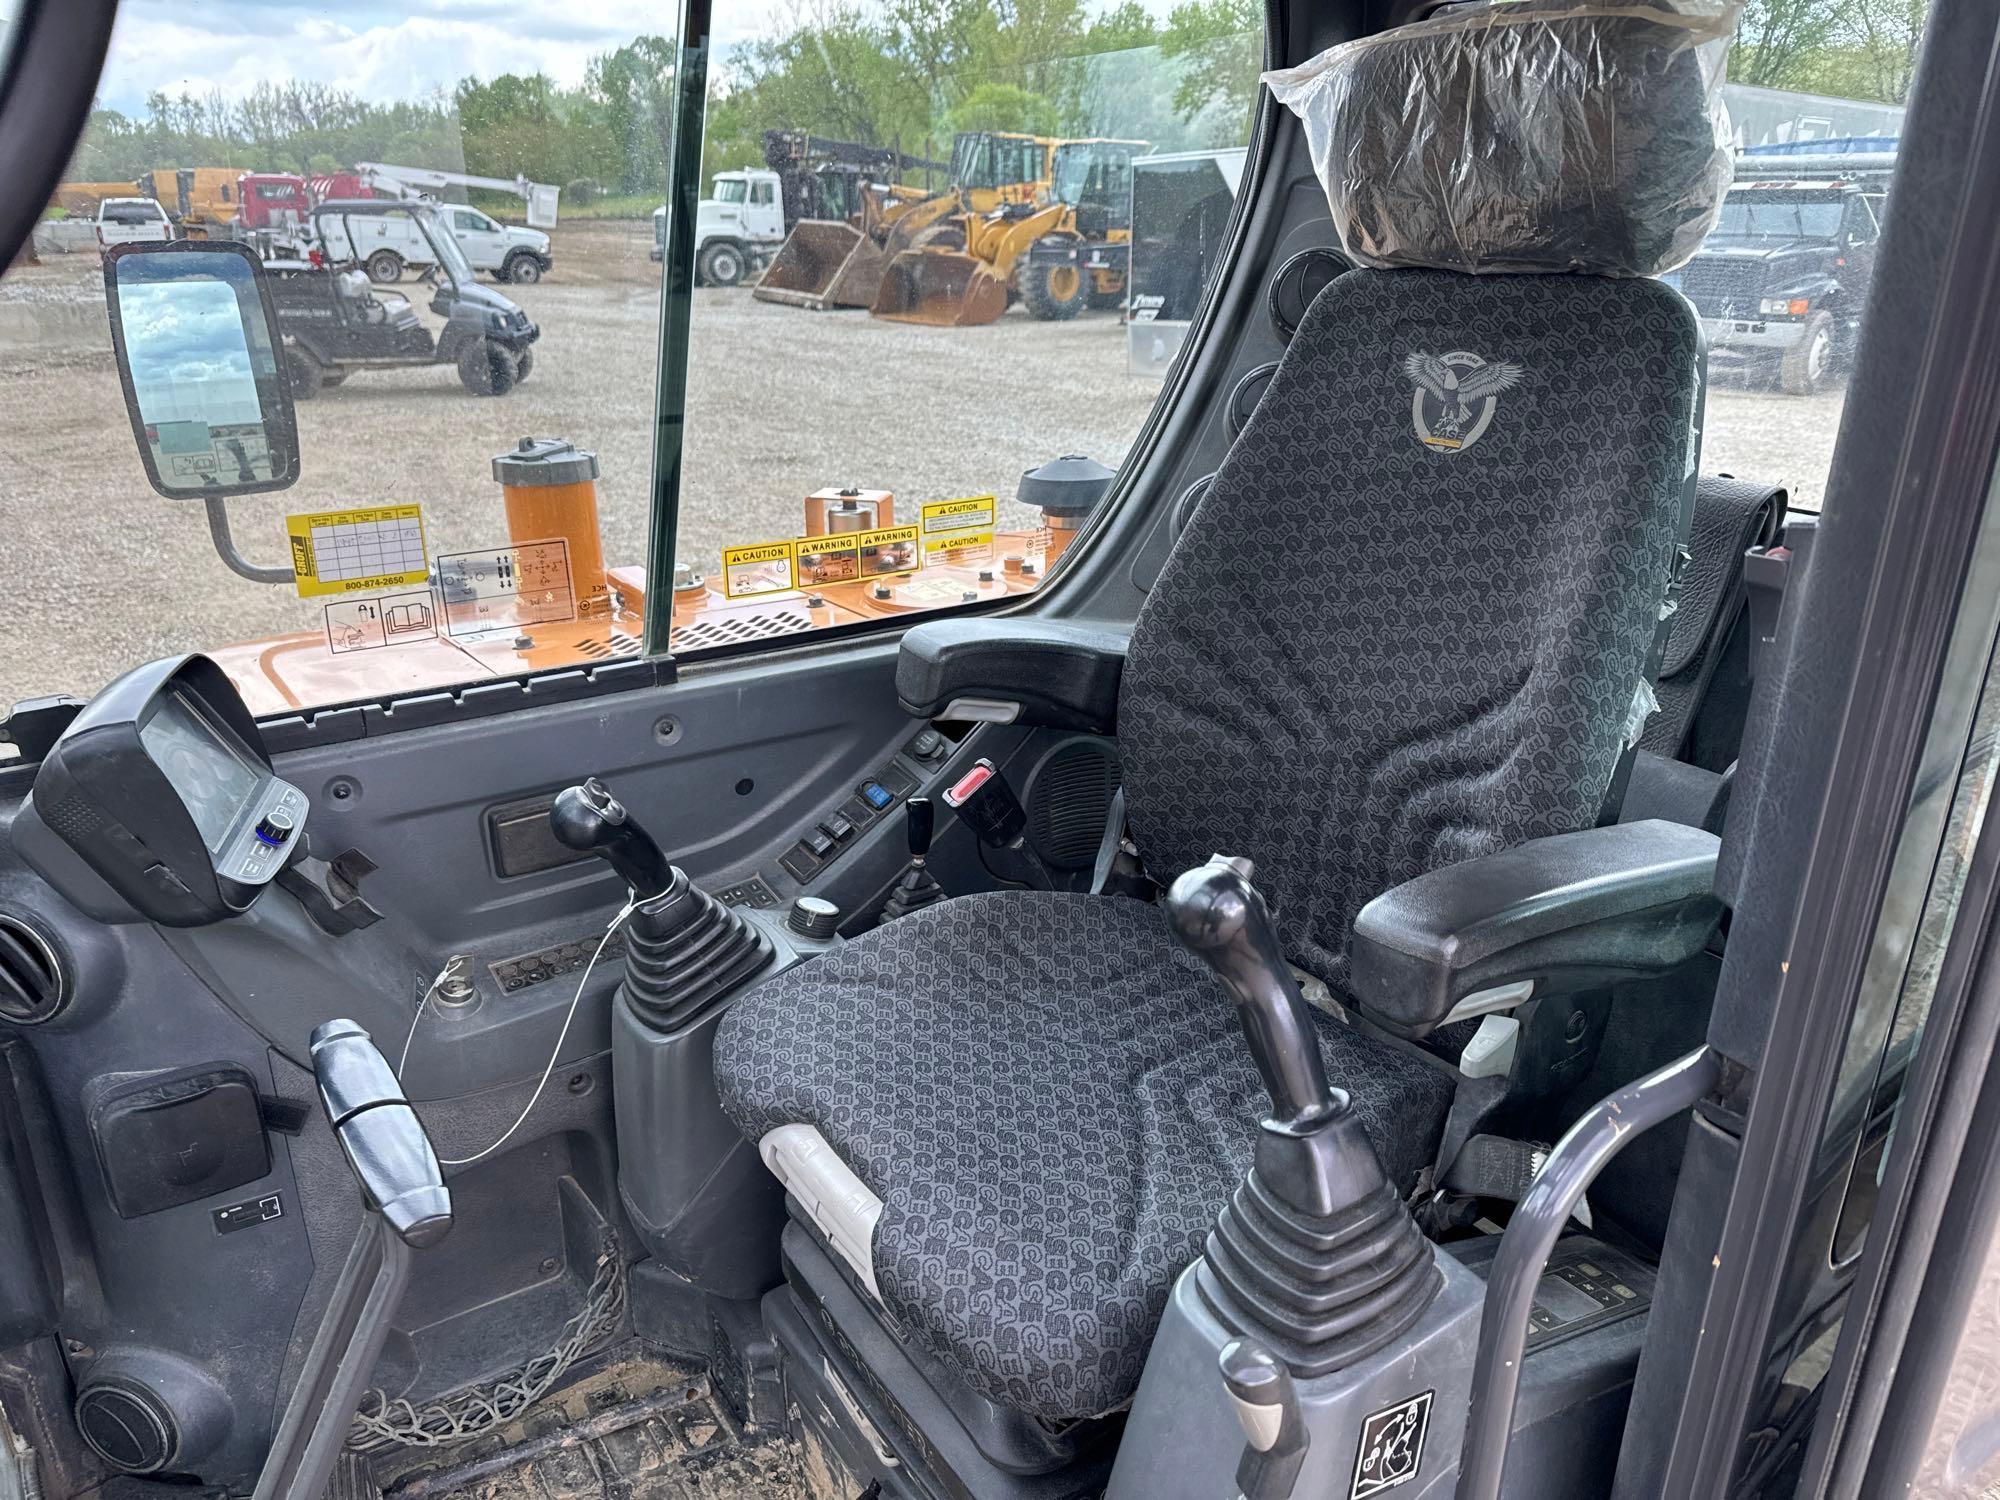 2019 CASE CX57C HYDRAULIC EXCAVATOR SN:HK0000670 powered by diesel engine, equipped with Cab, air,